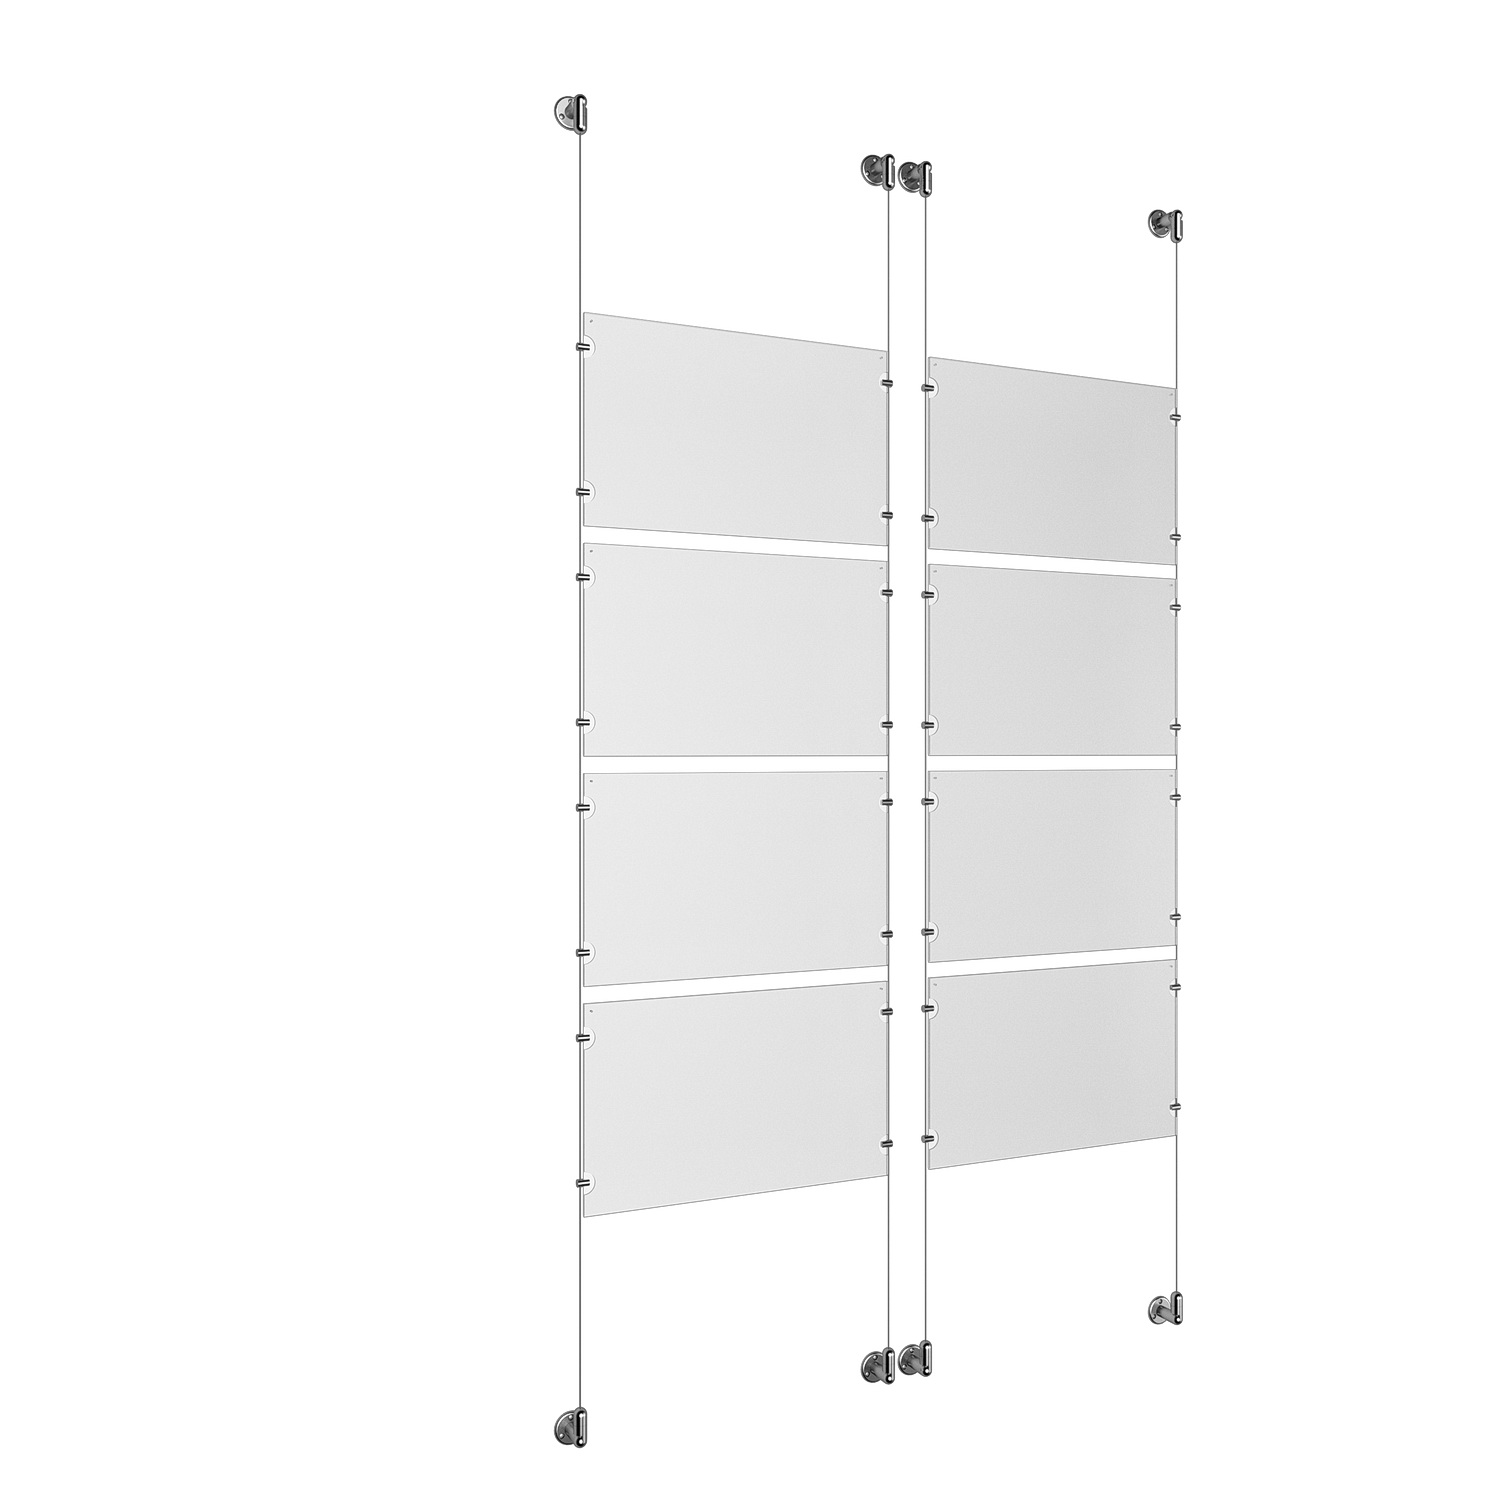 (8) 17'' Width x 11'' Height Clear Acrylic Frame & (4) Aluminum Clear Anodized Adjustable Angle Cable Systems with (32) Single-Sided Panel Grippers